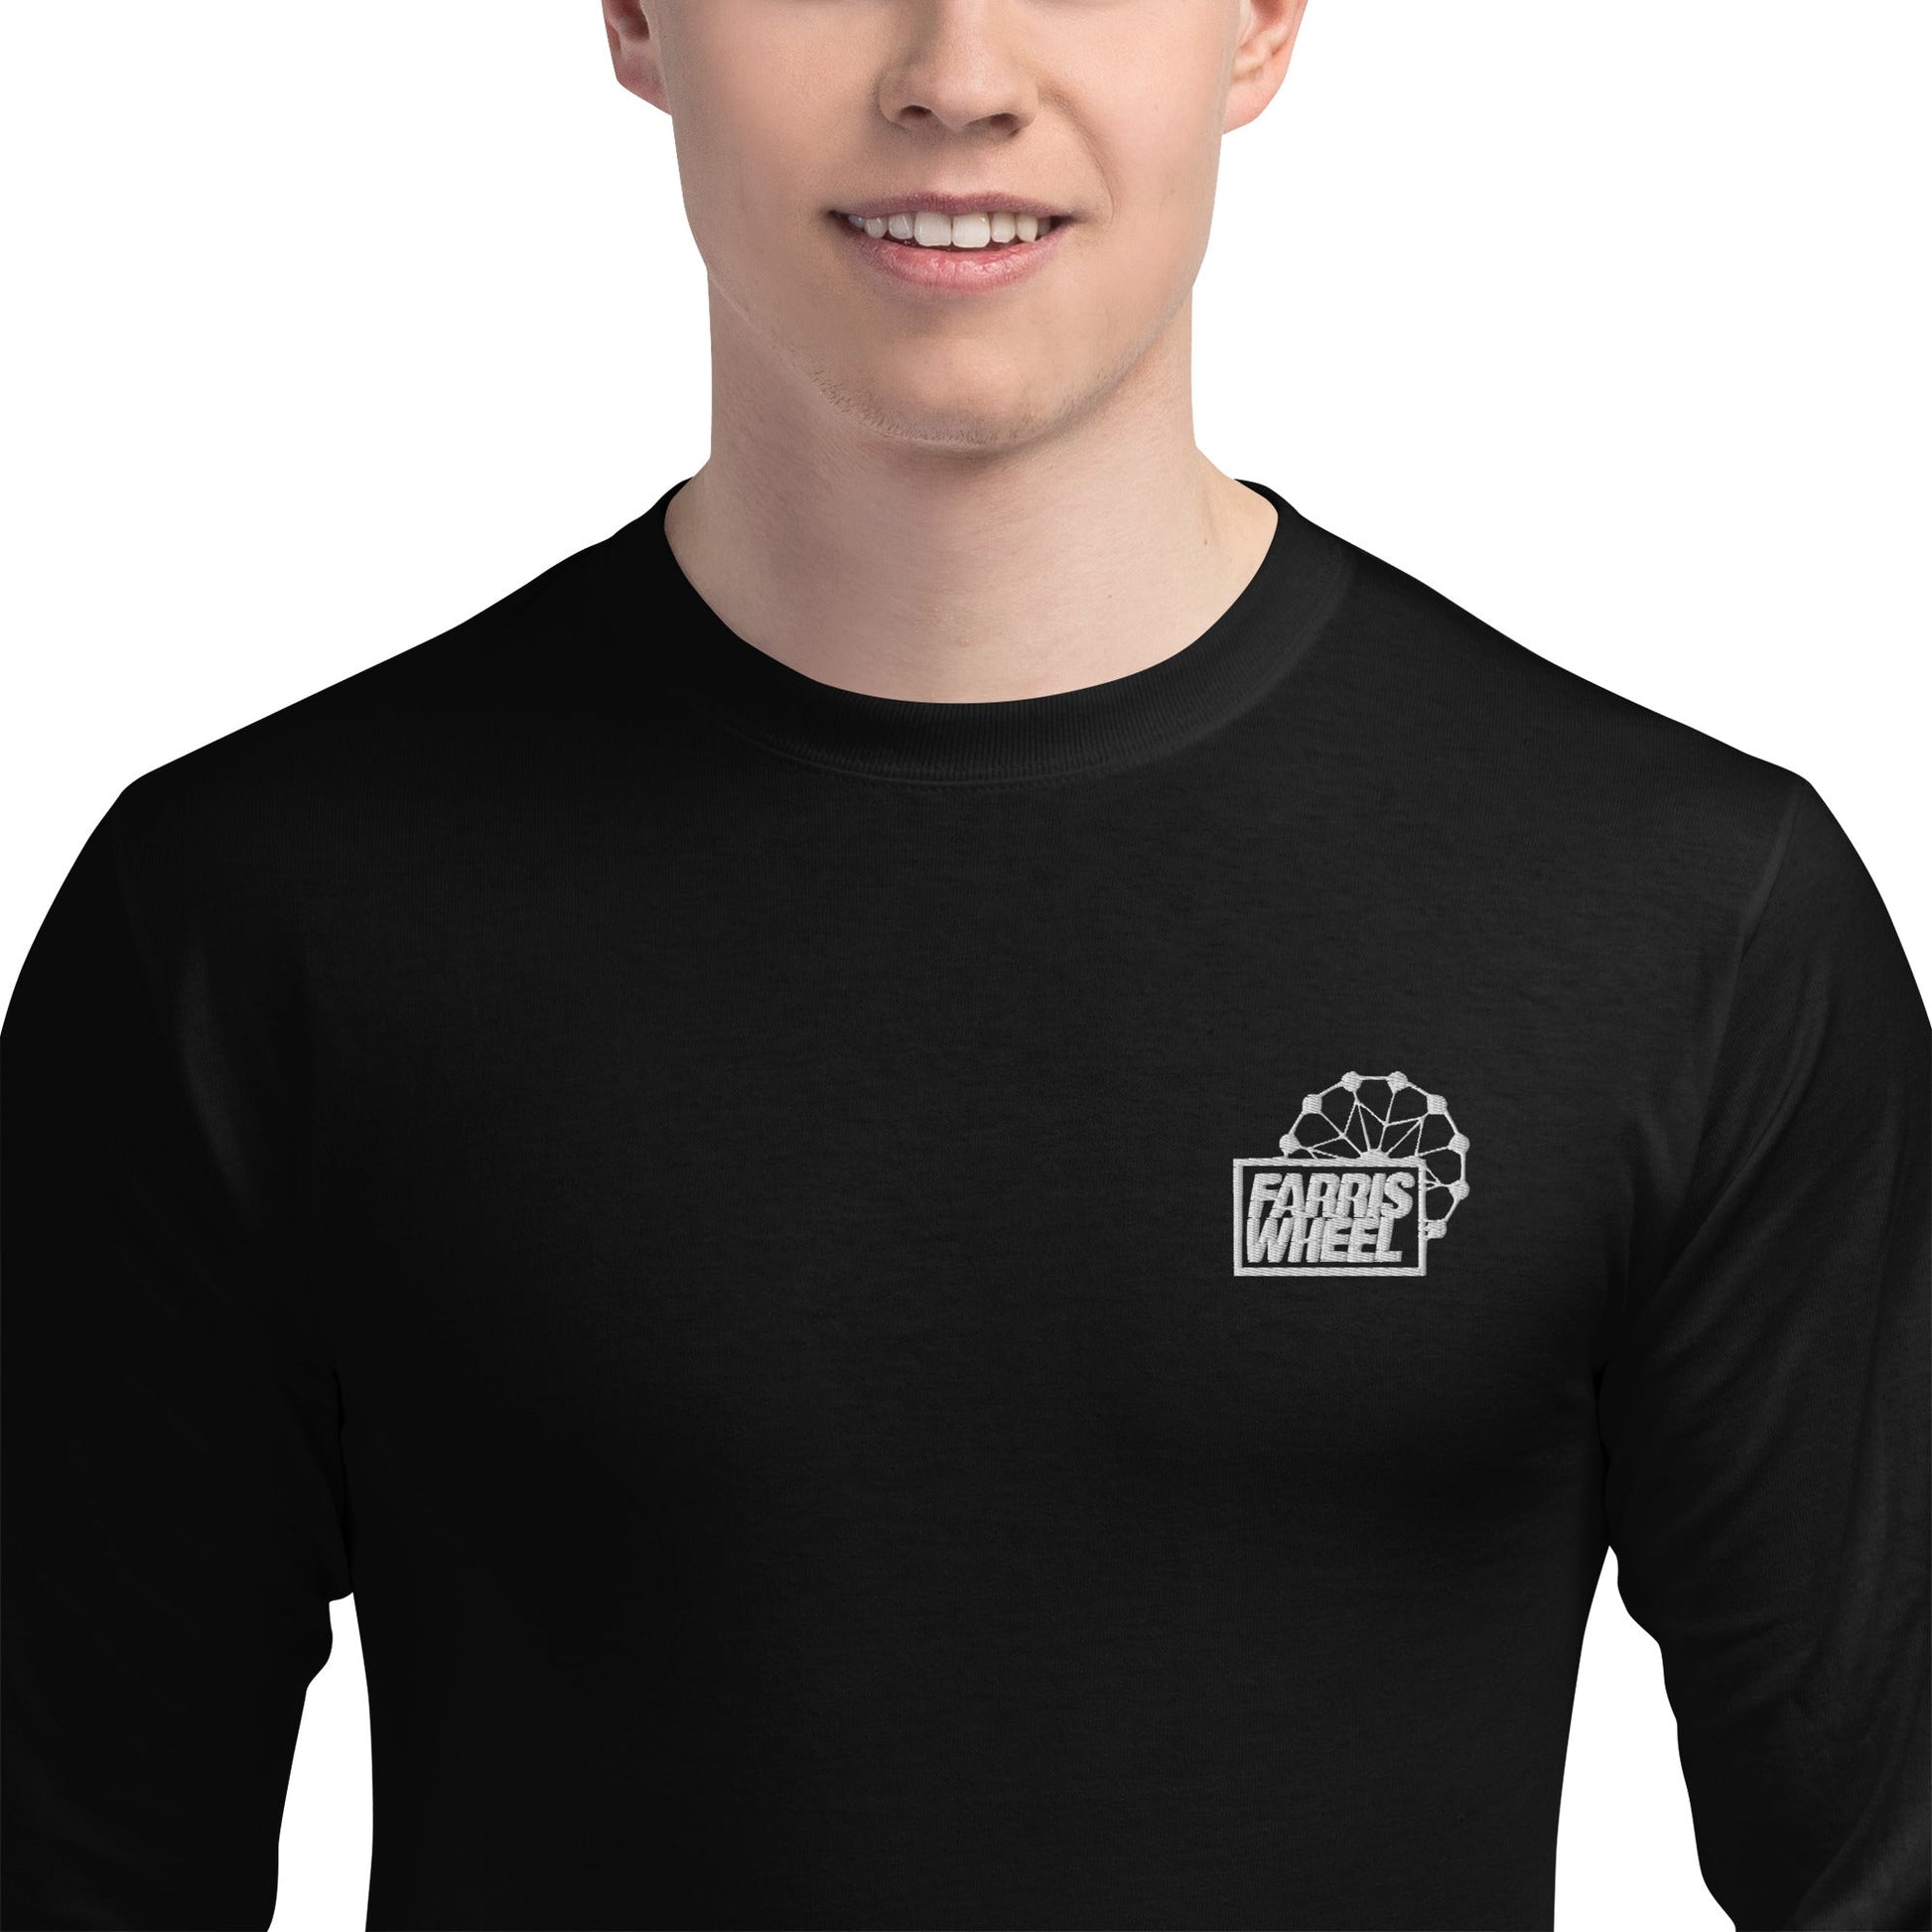 Farris Wheel Limited Men's Champion Long Sleeve Shirt - BeExtra! Apparel & More